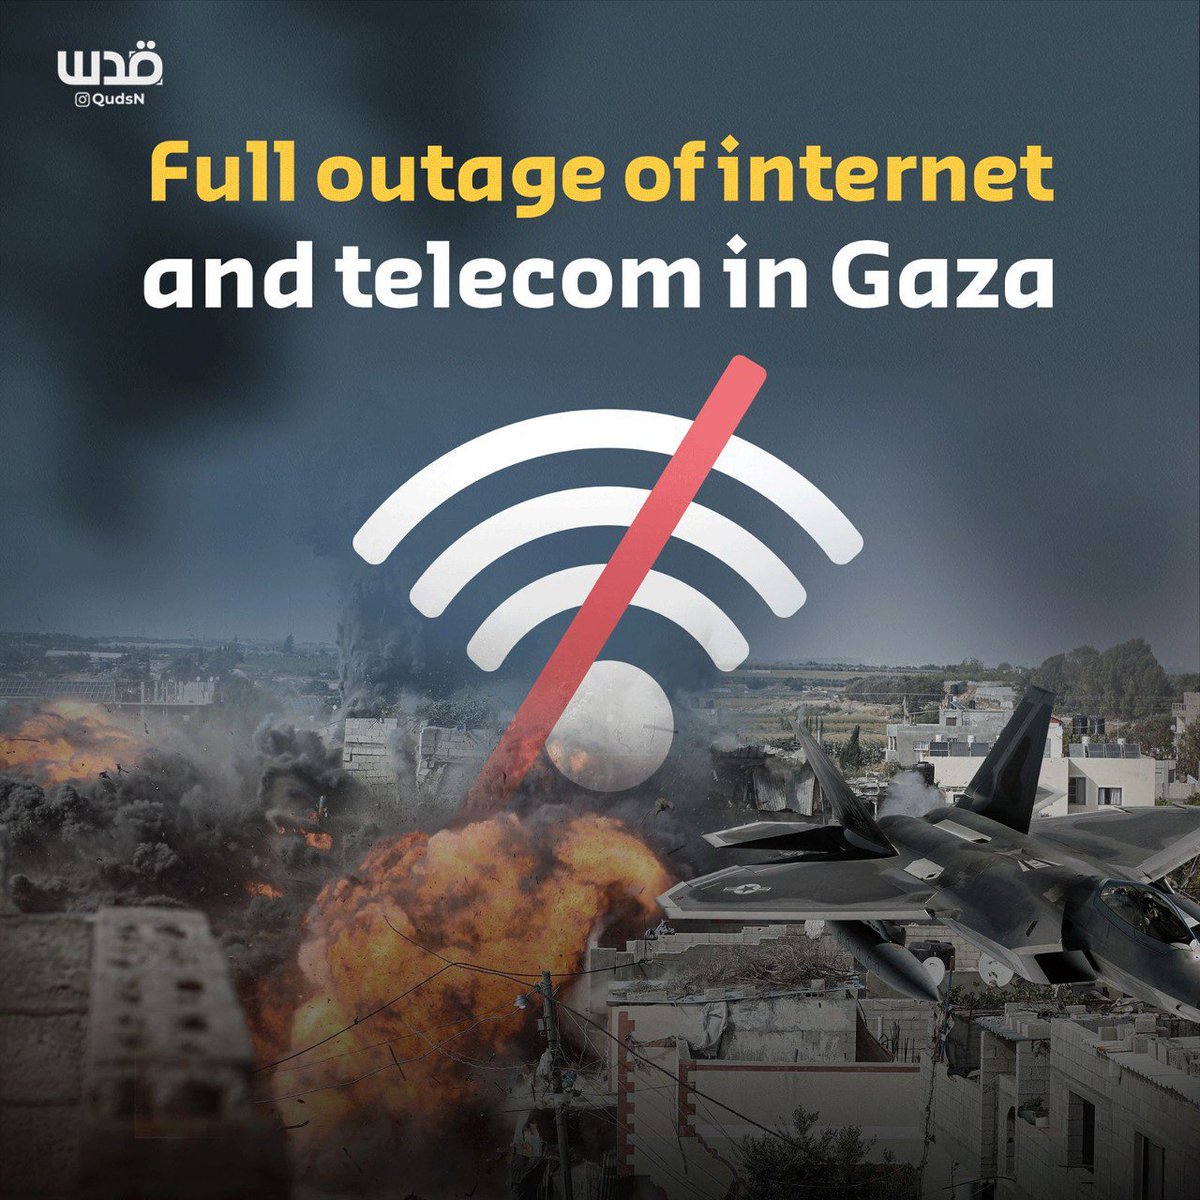 BREAKING| Full outage of communication and internet in Rafah right now as Israel persists in its attacks and incursion.